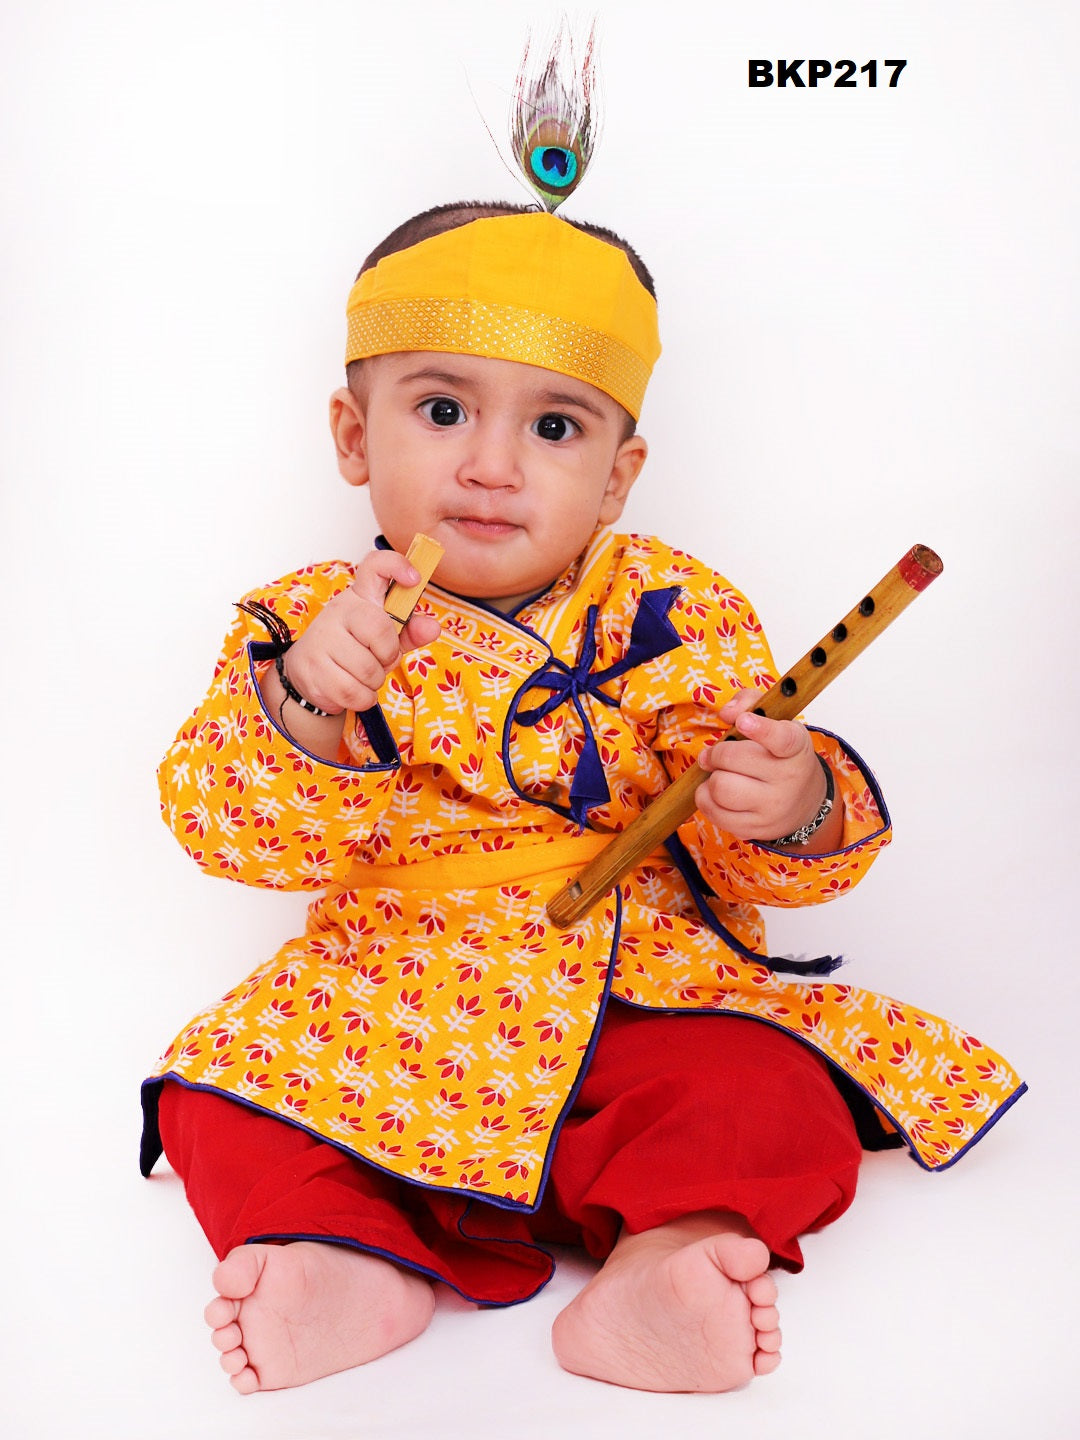 BKP217 - Yellow and red angrakha style cotton krishna costume set with accessories